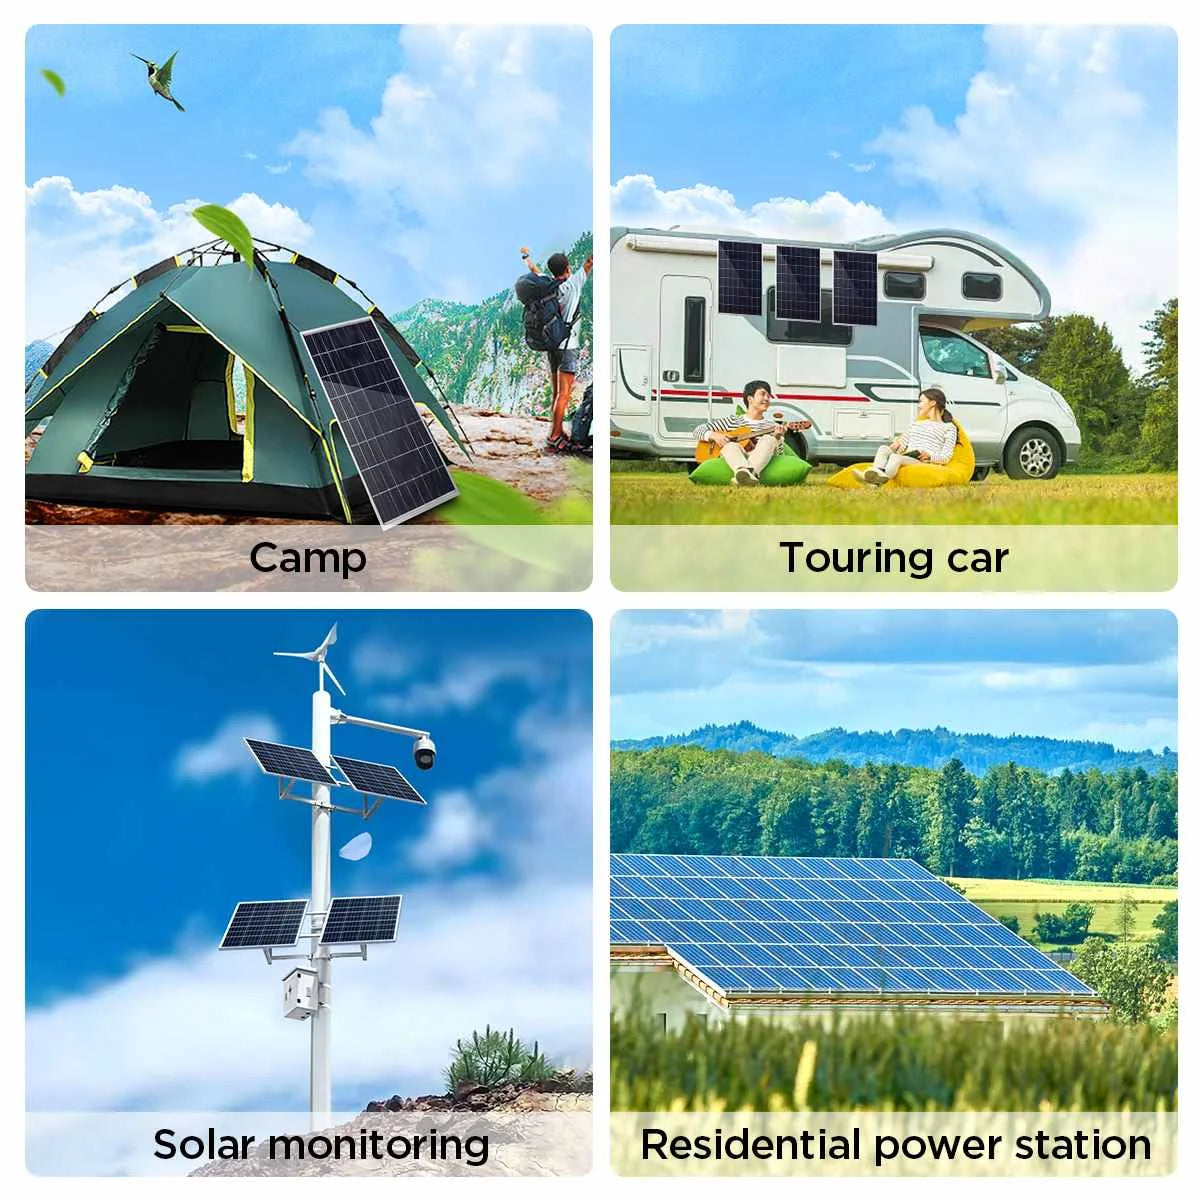 300W Solar Panel, Portable solar panel kit for camping, touring, or residential use with real-time monitoring.